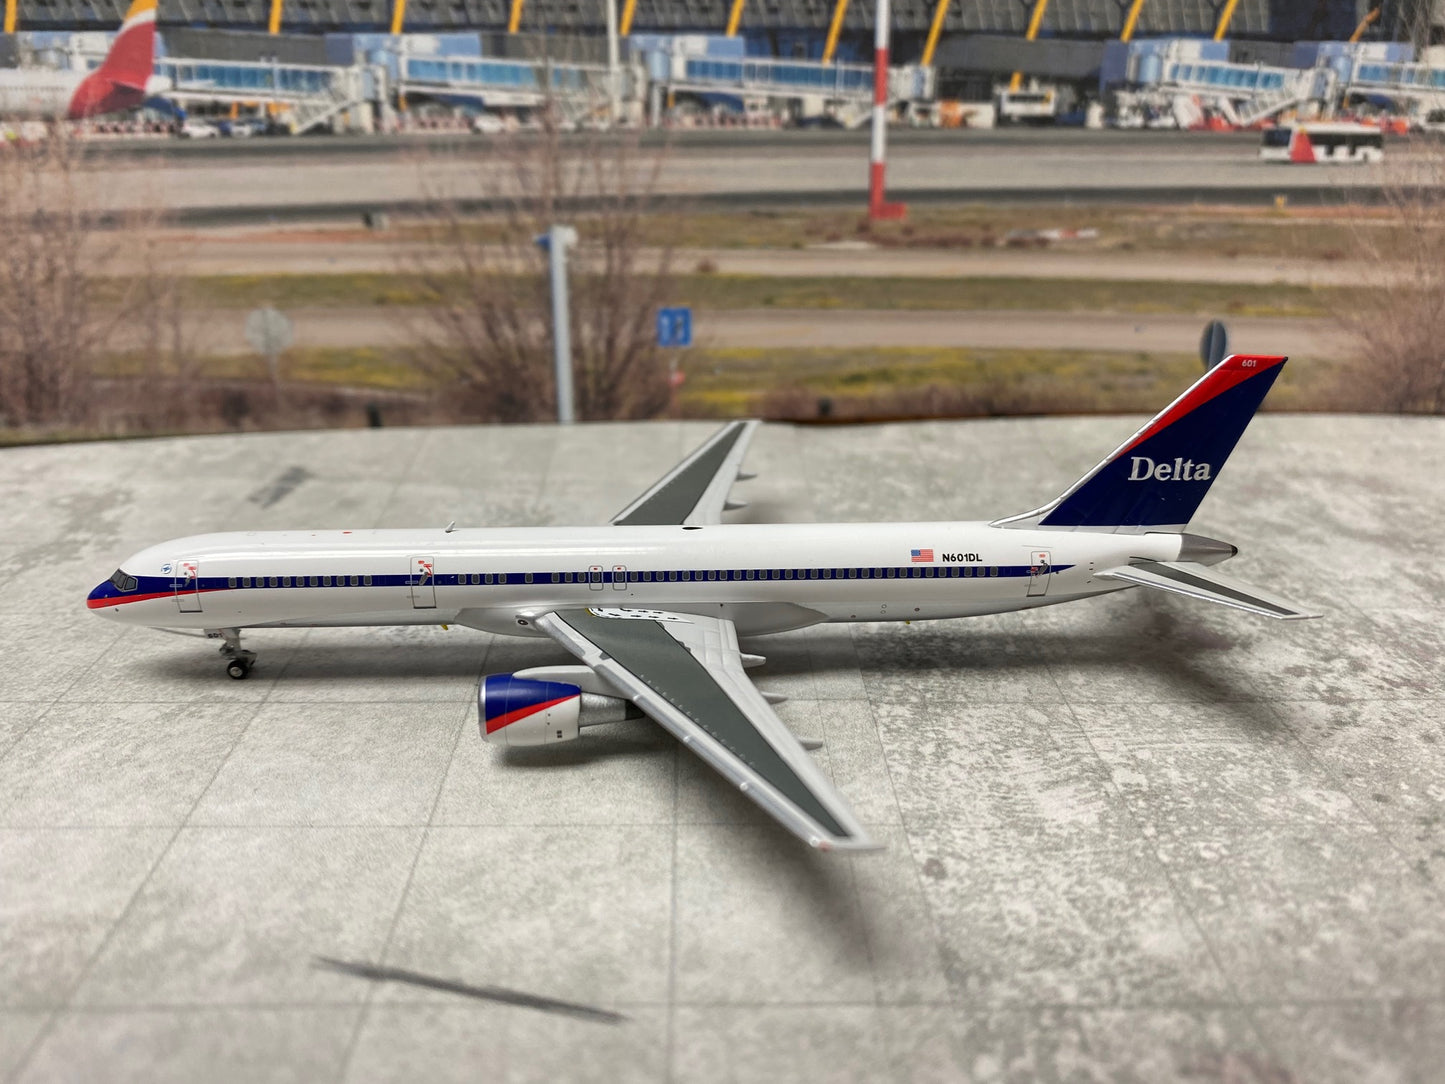 1/400 Delta Airlines B 757-200 NG Models 53170 *Missing "Delta Air Lines" titles on one side of fuselage*